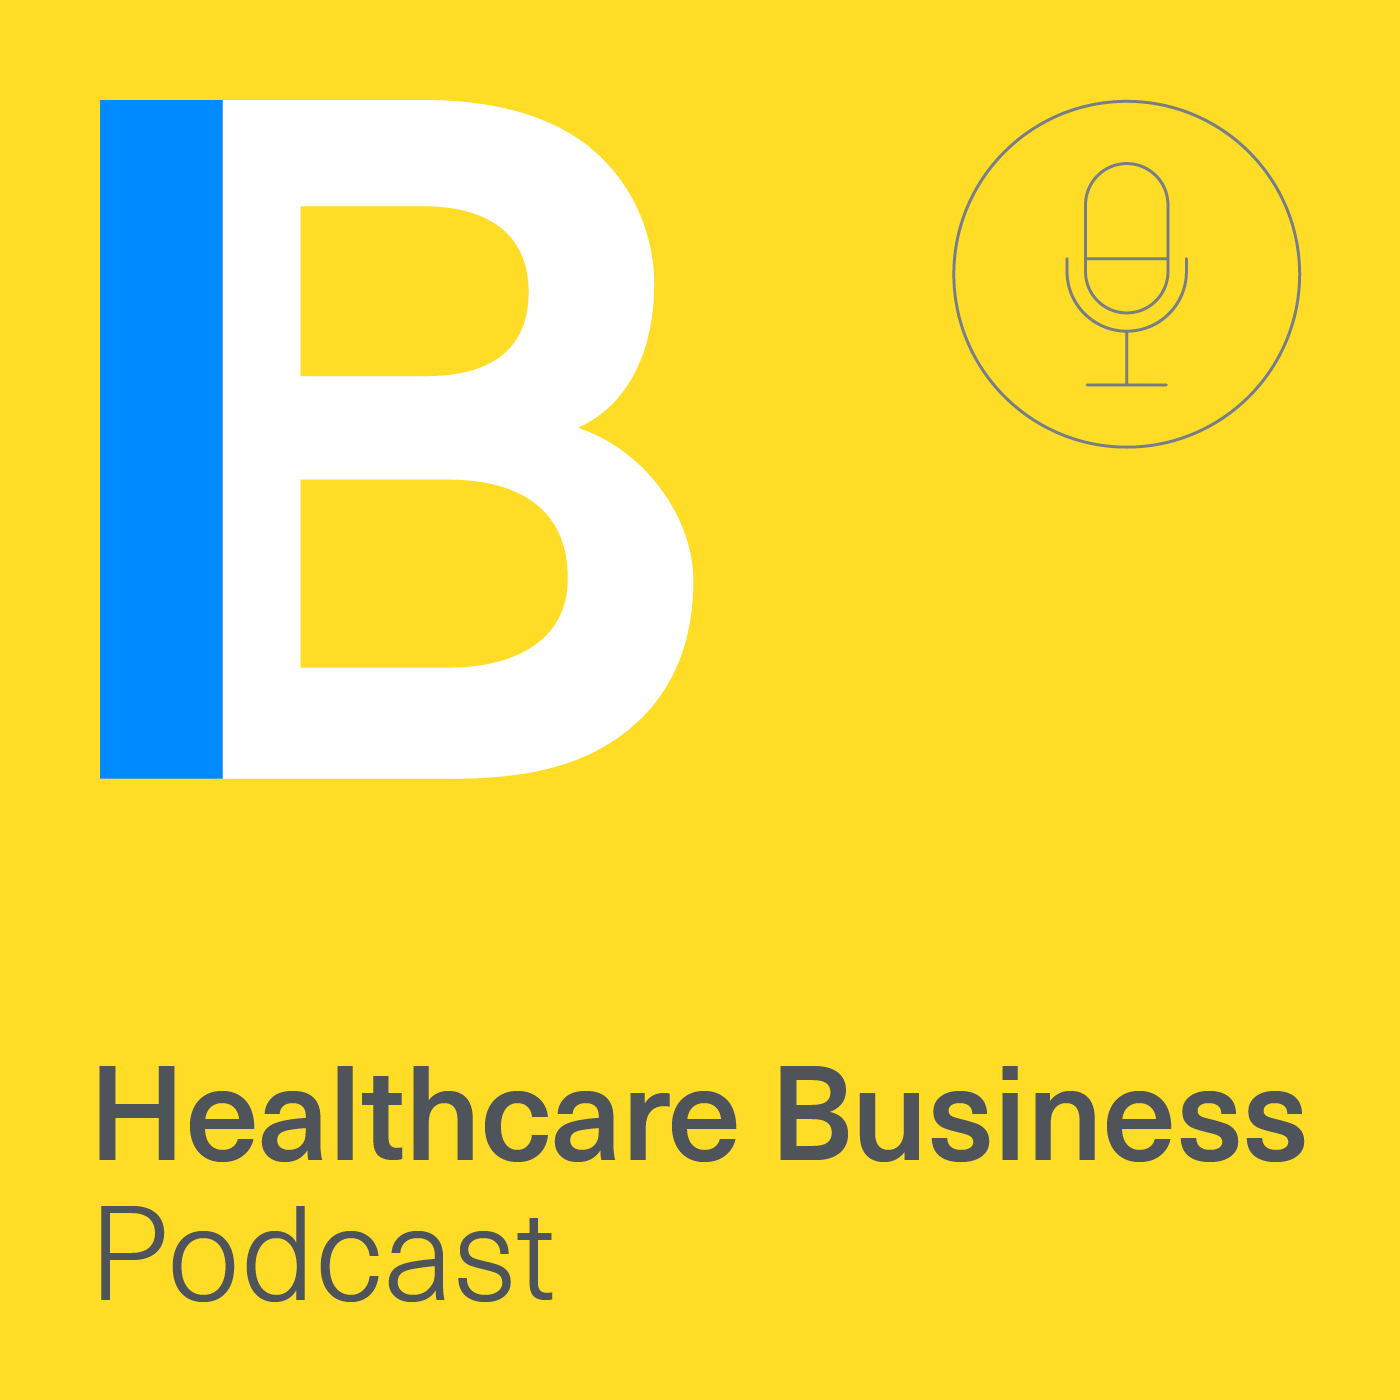 Healthcare Business #5: Managing a health tech company